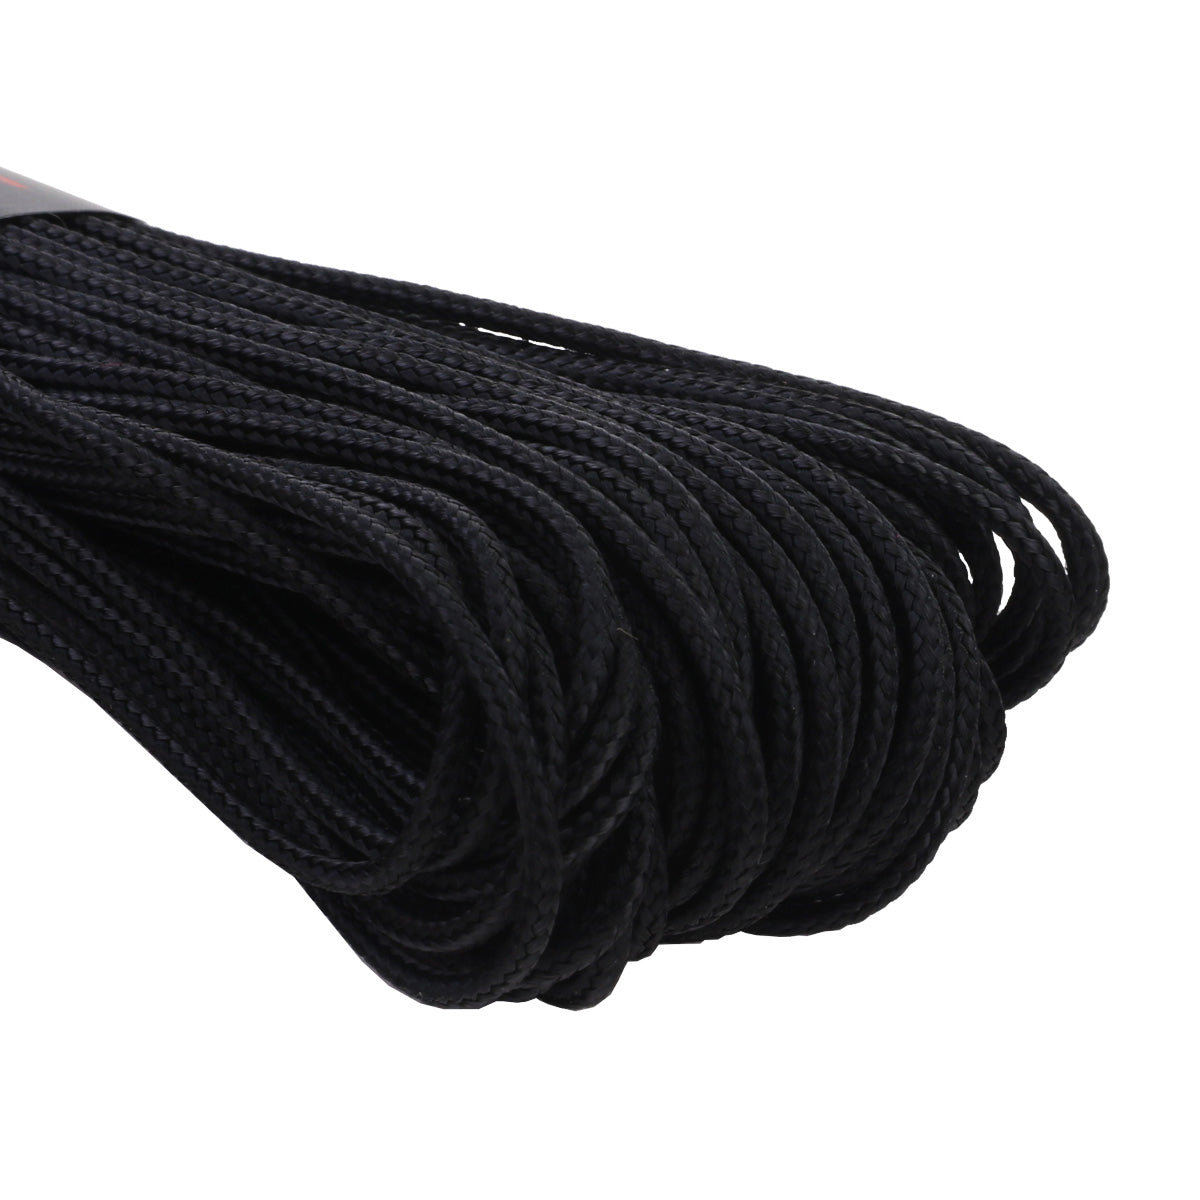 Atwood Rope 1/16 inch Microcord 100 foot spool, Mosquito Cord, 2mm paracord,  Micro Parachute Cord - BLACK in Kenya